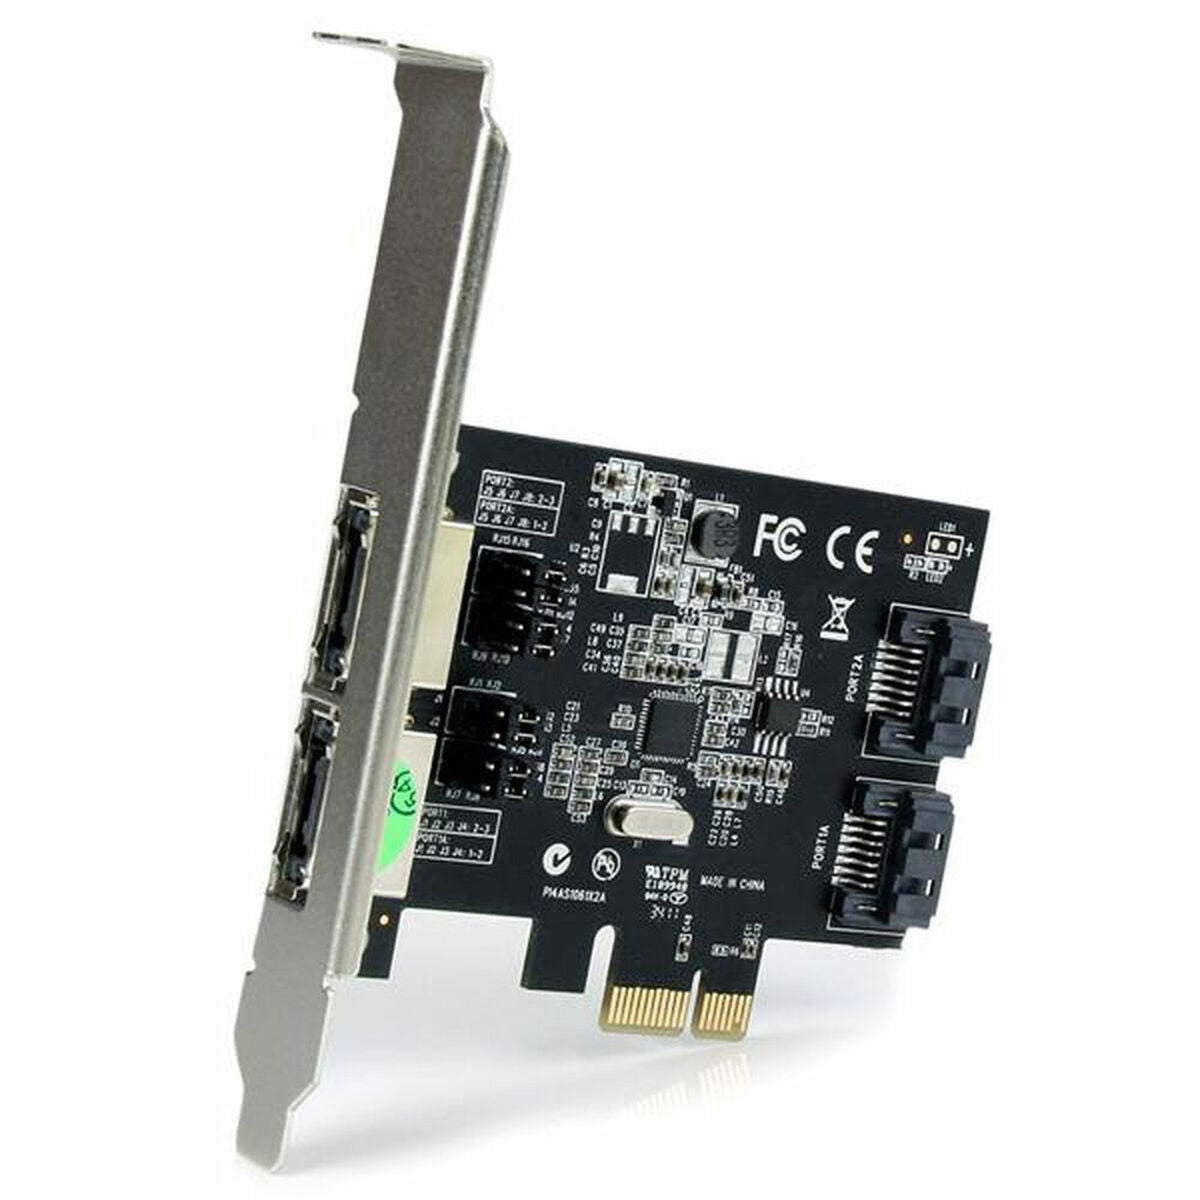 PCI Card Startech PEXESAT322I, Startech, Computing, Components, pci-card-startech-pexesat322i, Brand_Startech, category-reference-2609, category-reference-2803, category-reference-2811, category-reference-t-19685, category-reference-t-19912, category-reference-t-21360, category-reference-t-25662, computers / components, Condition_NEW, Price_50 - 100, Teleworking, RiotNook